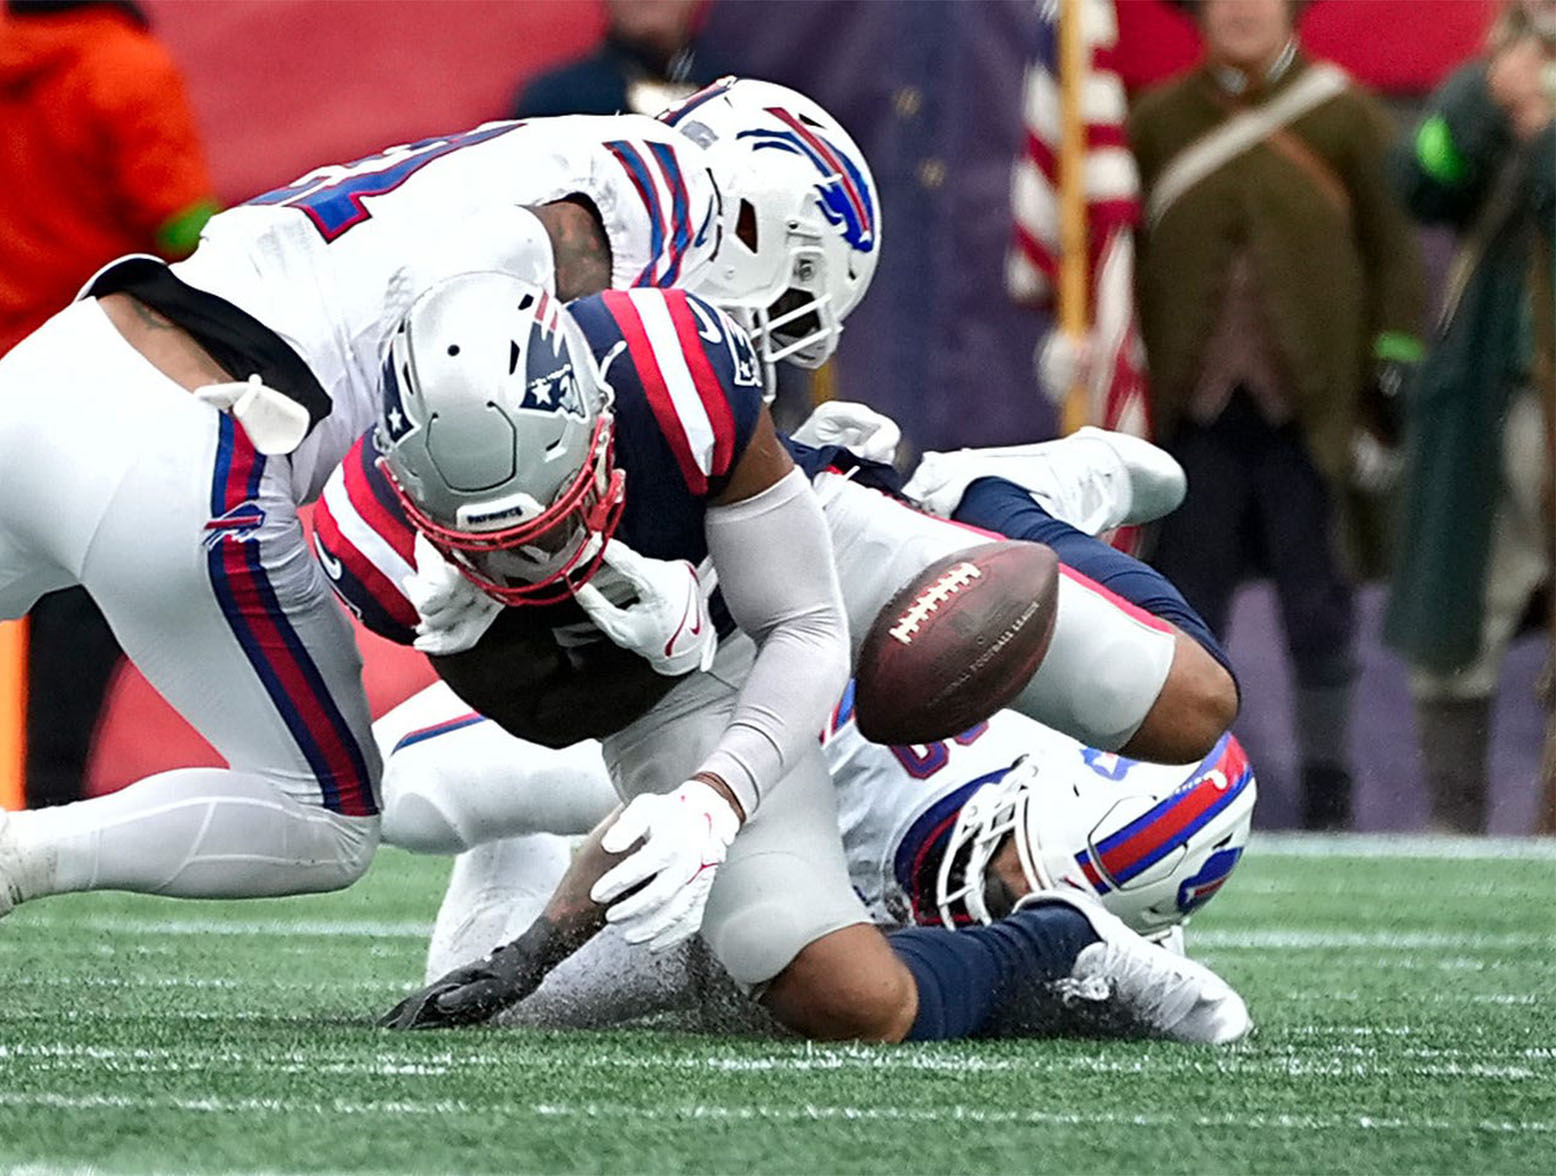 Kendrick Bourne gets hit and fumbles a ball that will be recovered by the Bills after a 4th quarter reception.